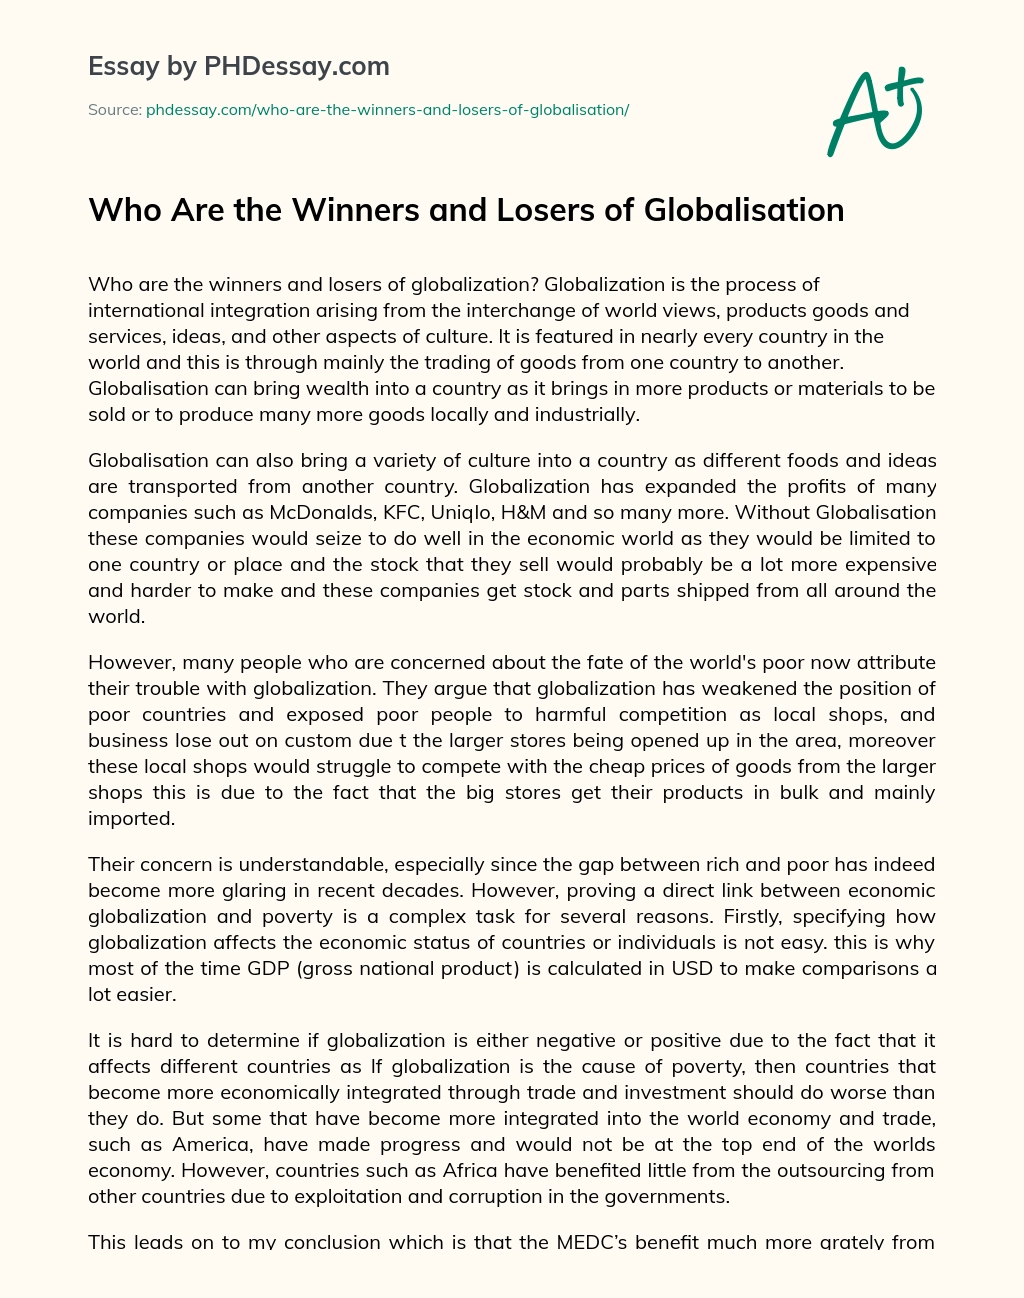 Who Are the Winners and Losers of Globalisation essay